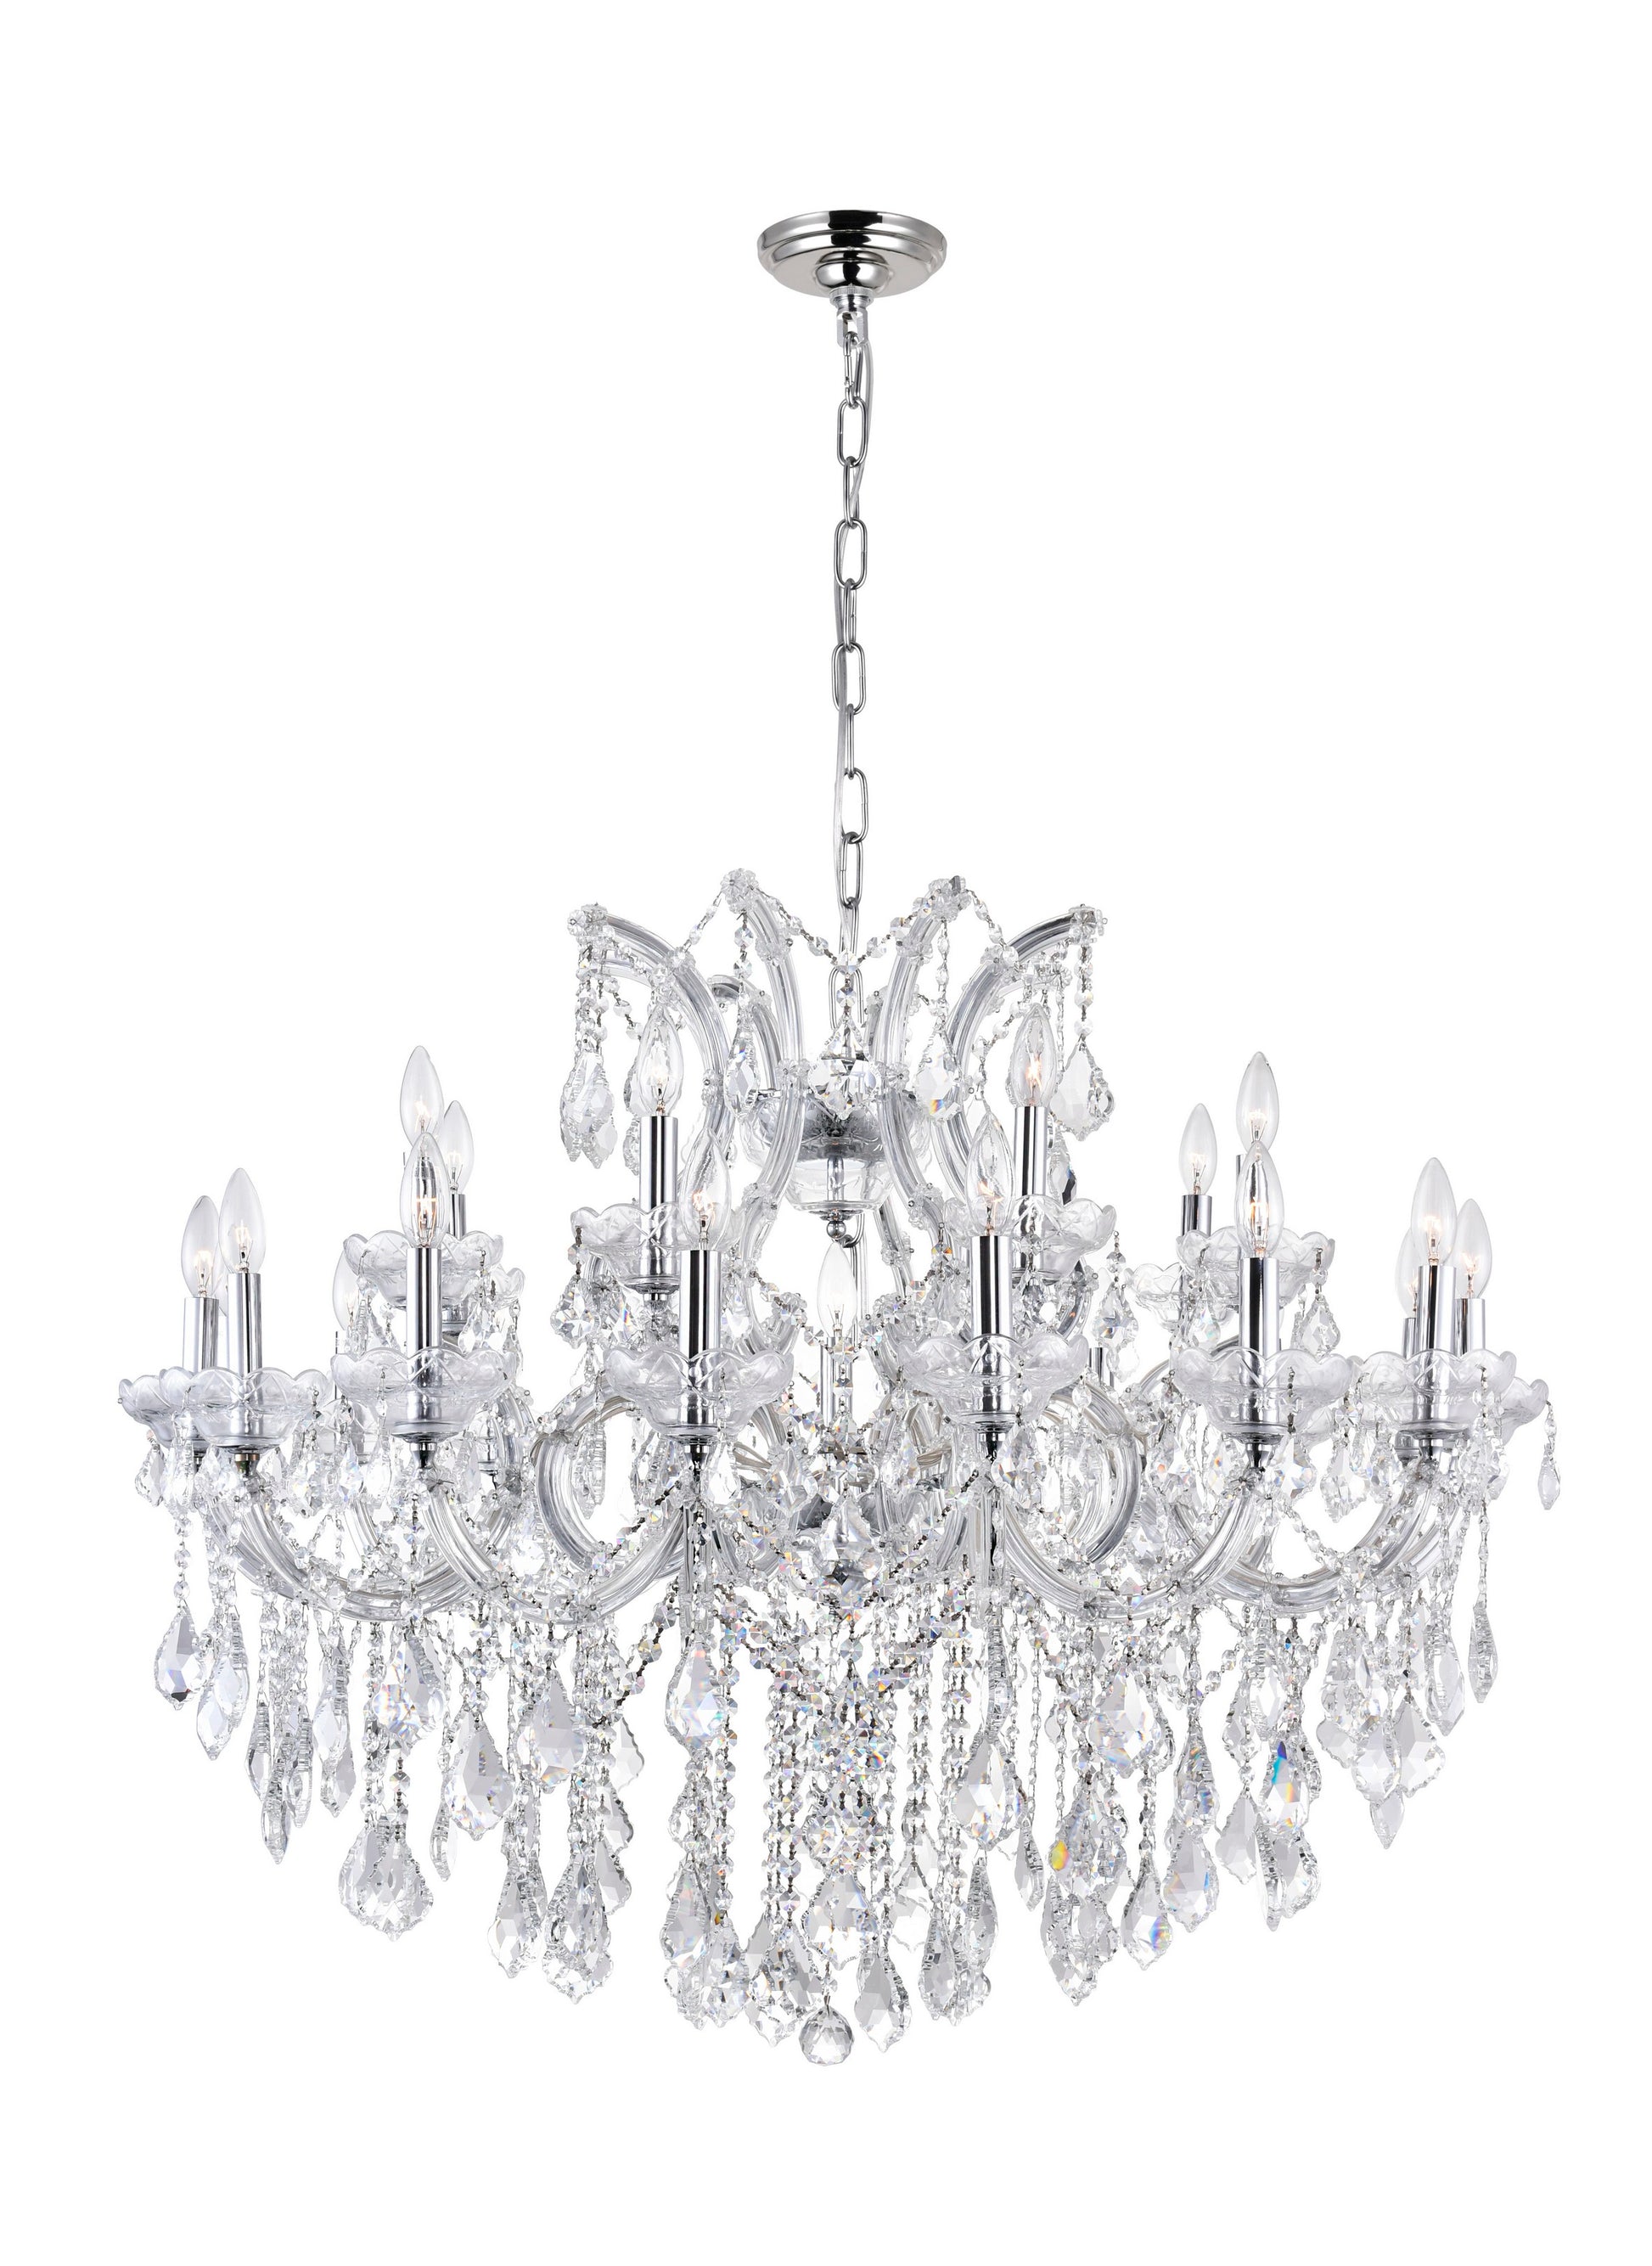 19 LIGHT UP CHANDELIER WITH CHROME FINISH - Dreamart Gallery